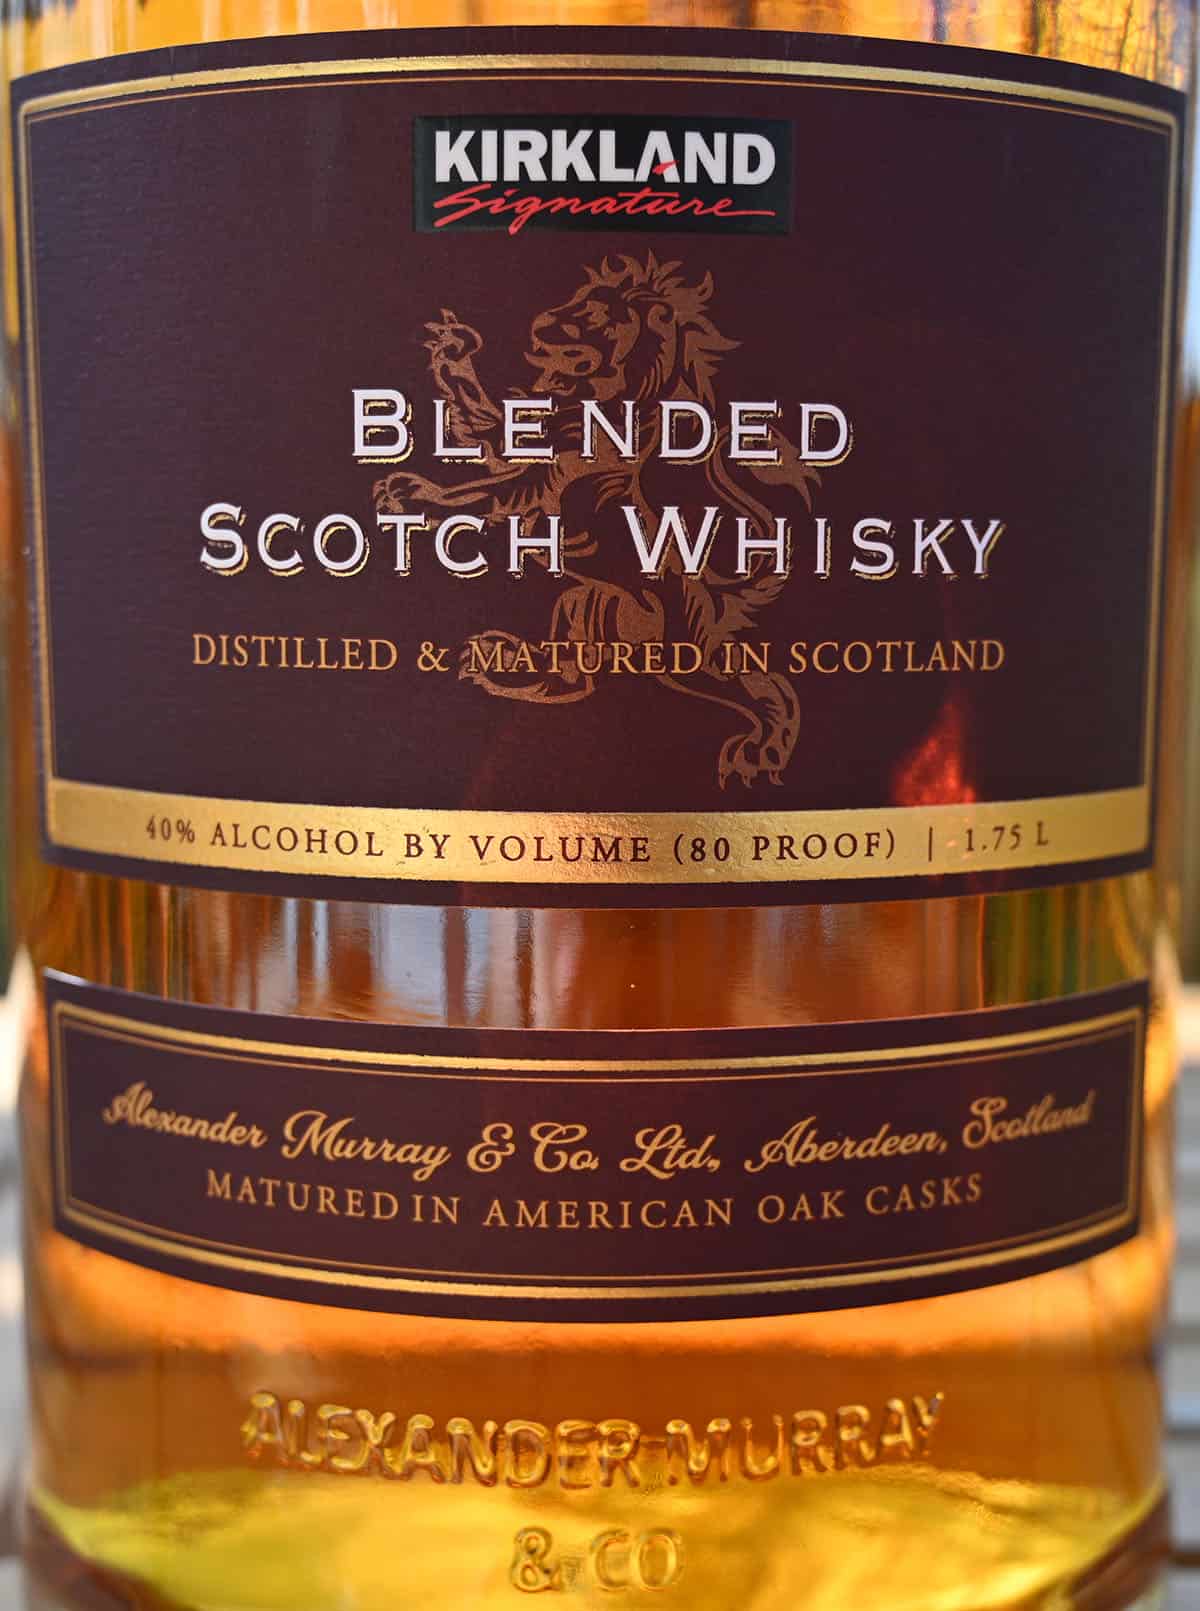 Image of the front label from the bottle of the Costco Blended Scotch Whisky.